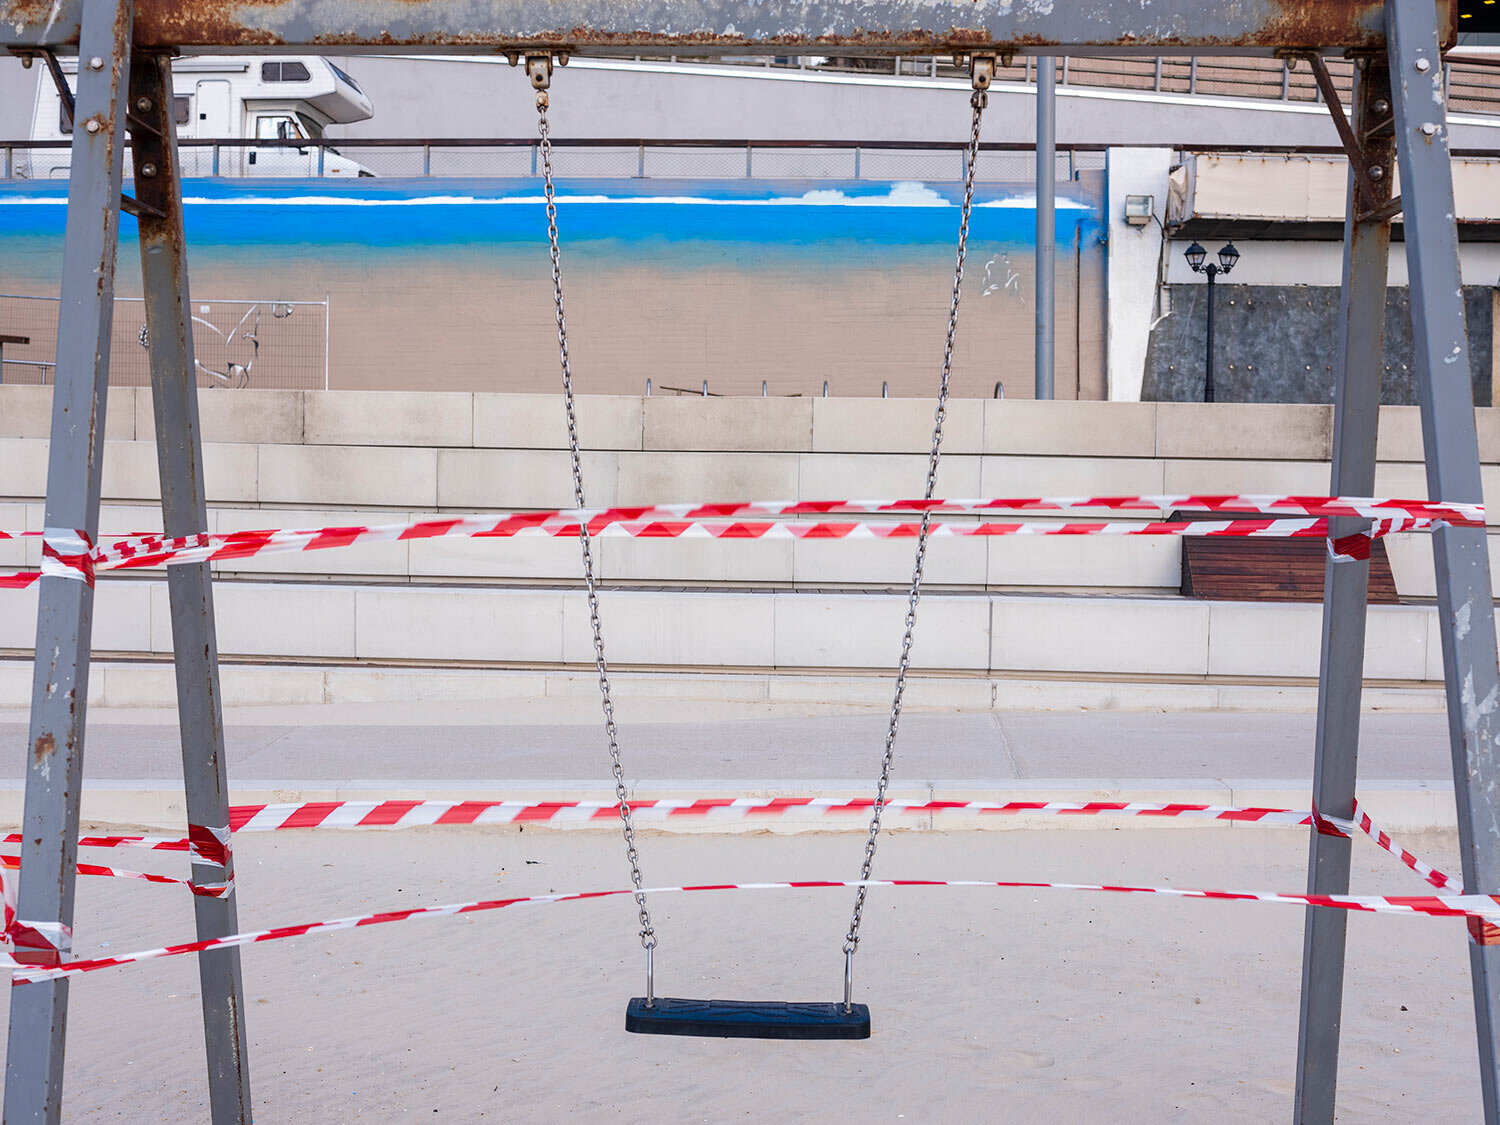  This Thursday, March 19, 2020 photo shows a swin at Tel Aviv's beachfront wrapped in tape to prevent public access. (AP Photo/Oded Balilty) 